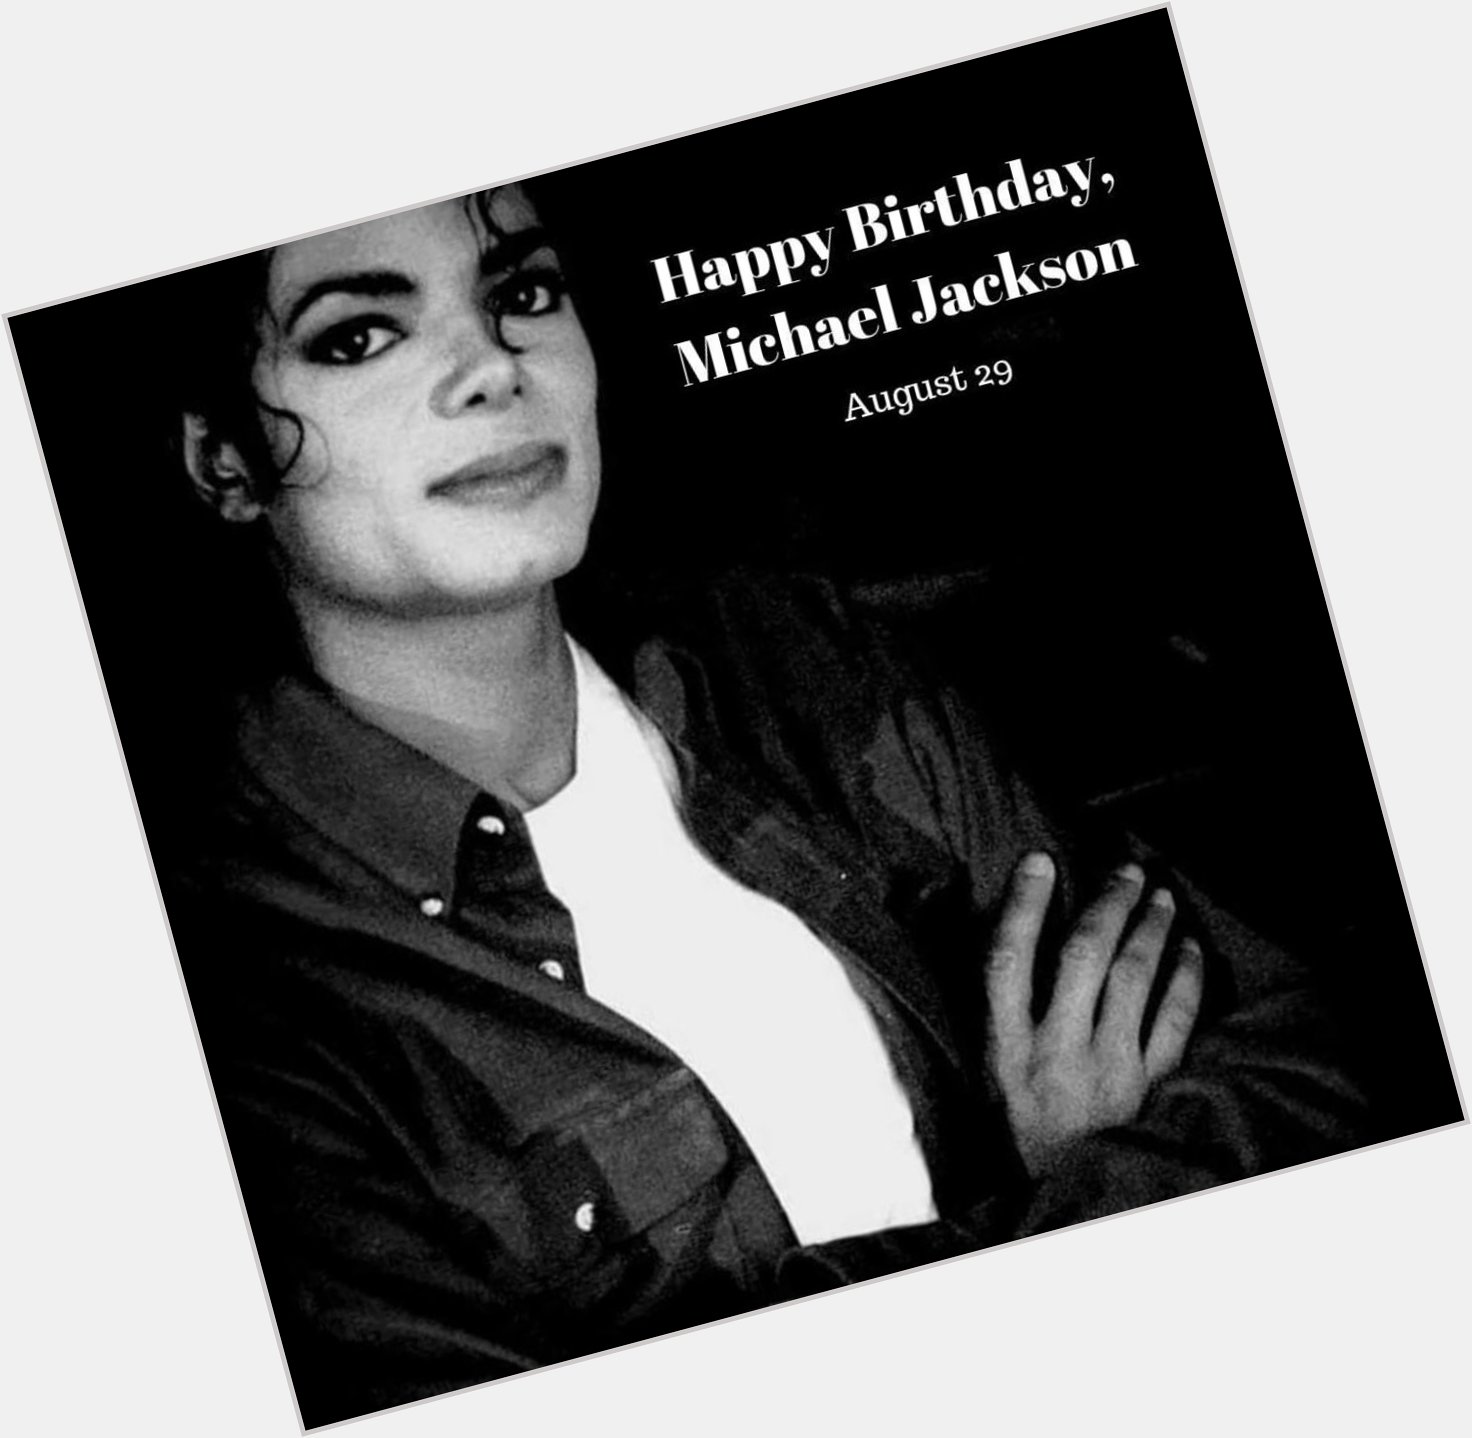 He was such a beautiful human being, inside and out Happy Birthday Michael Jackson  